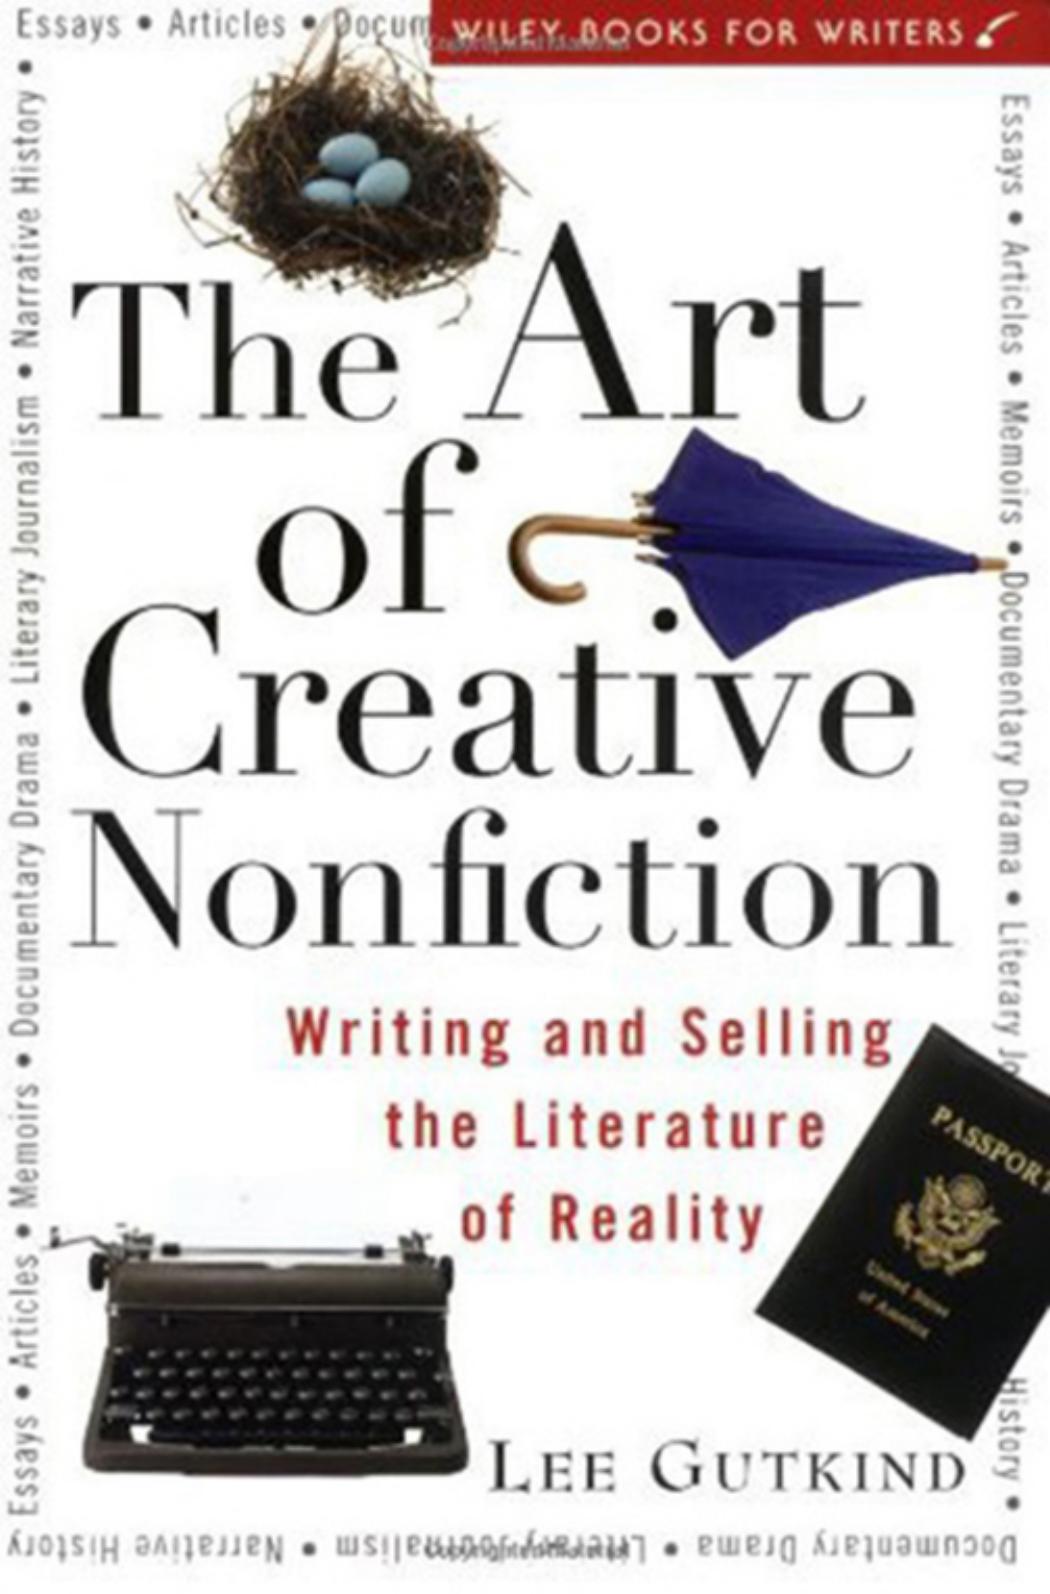 The Art of Creative Nonfiction: Writing and Selling the Literature of Reality by Lee Gutkind